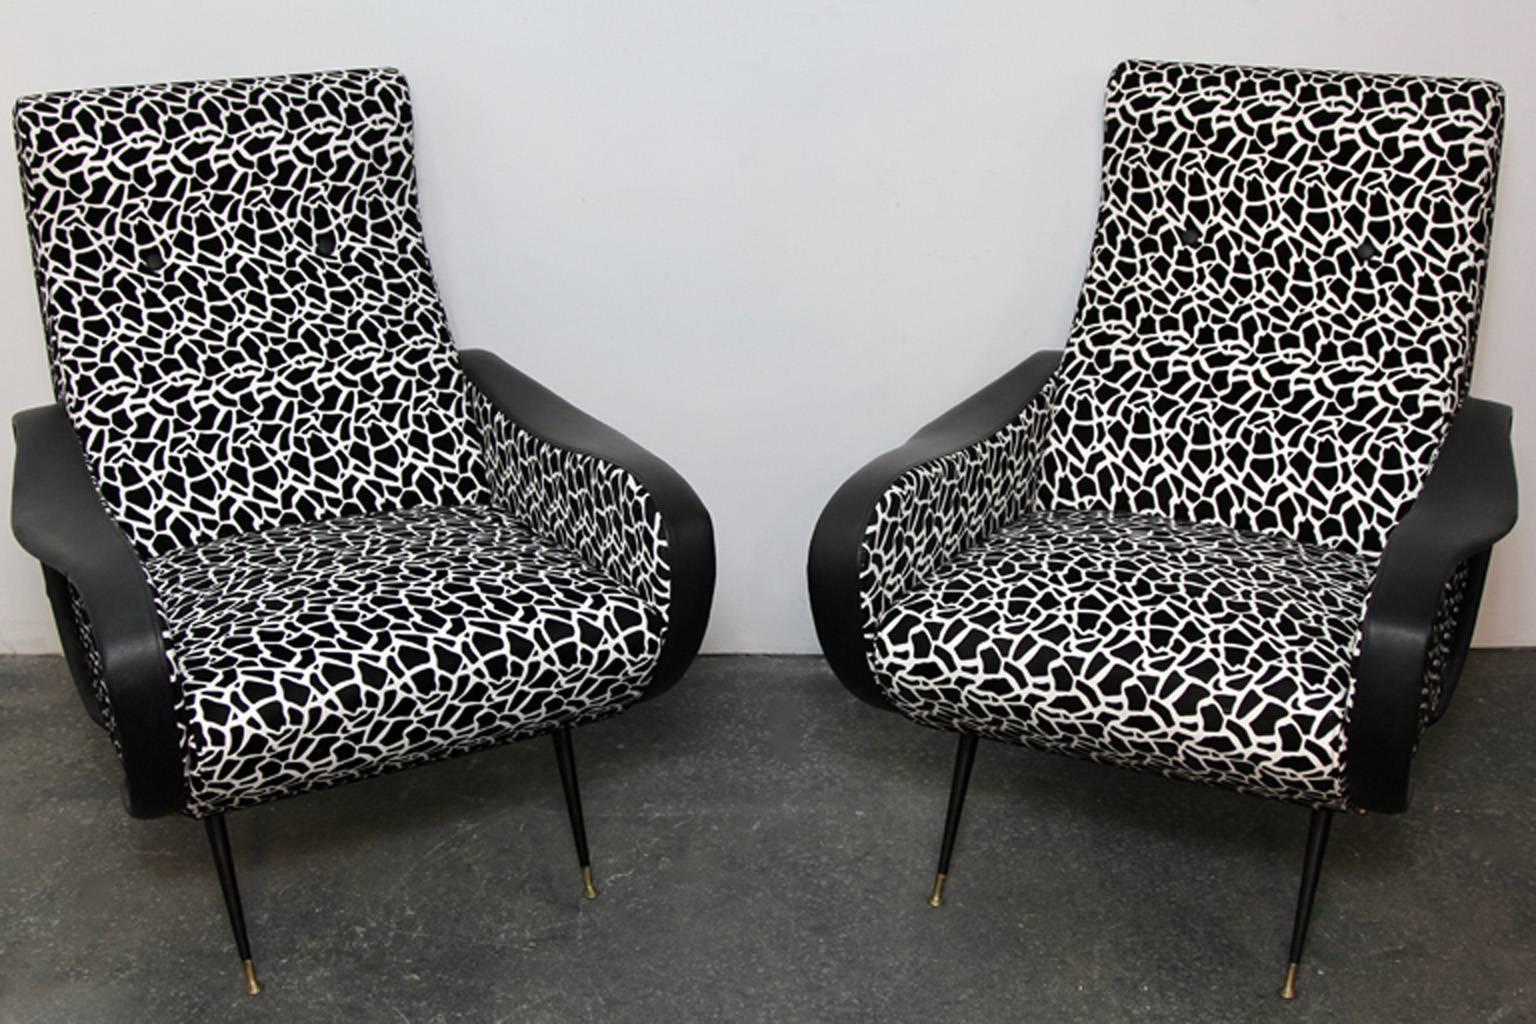 Contemporary exampled of Italian style Mid-Century Modern club chairs. Black and white funky fabric with leather arm details. Some scrapes and tears to leather on arms. Enameled steel legs with brass detail.